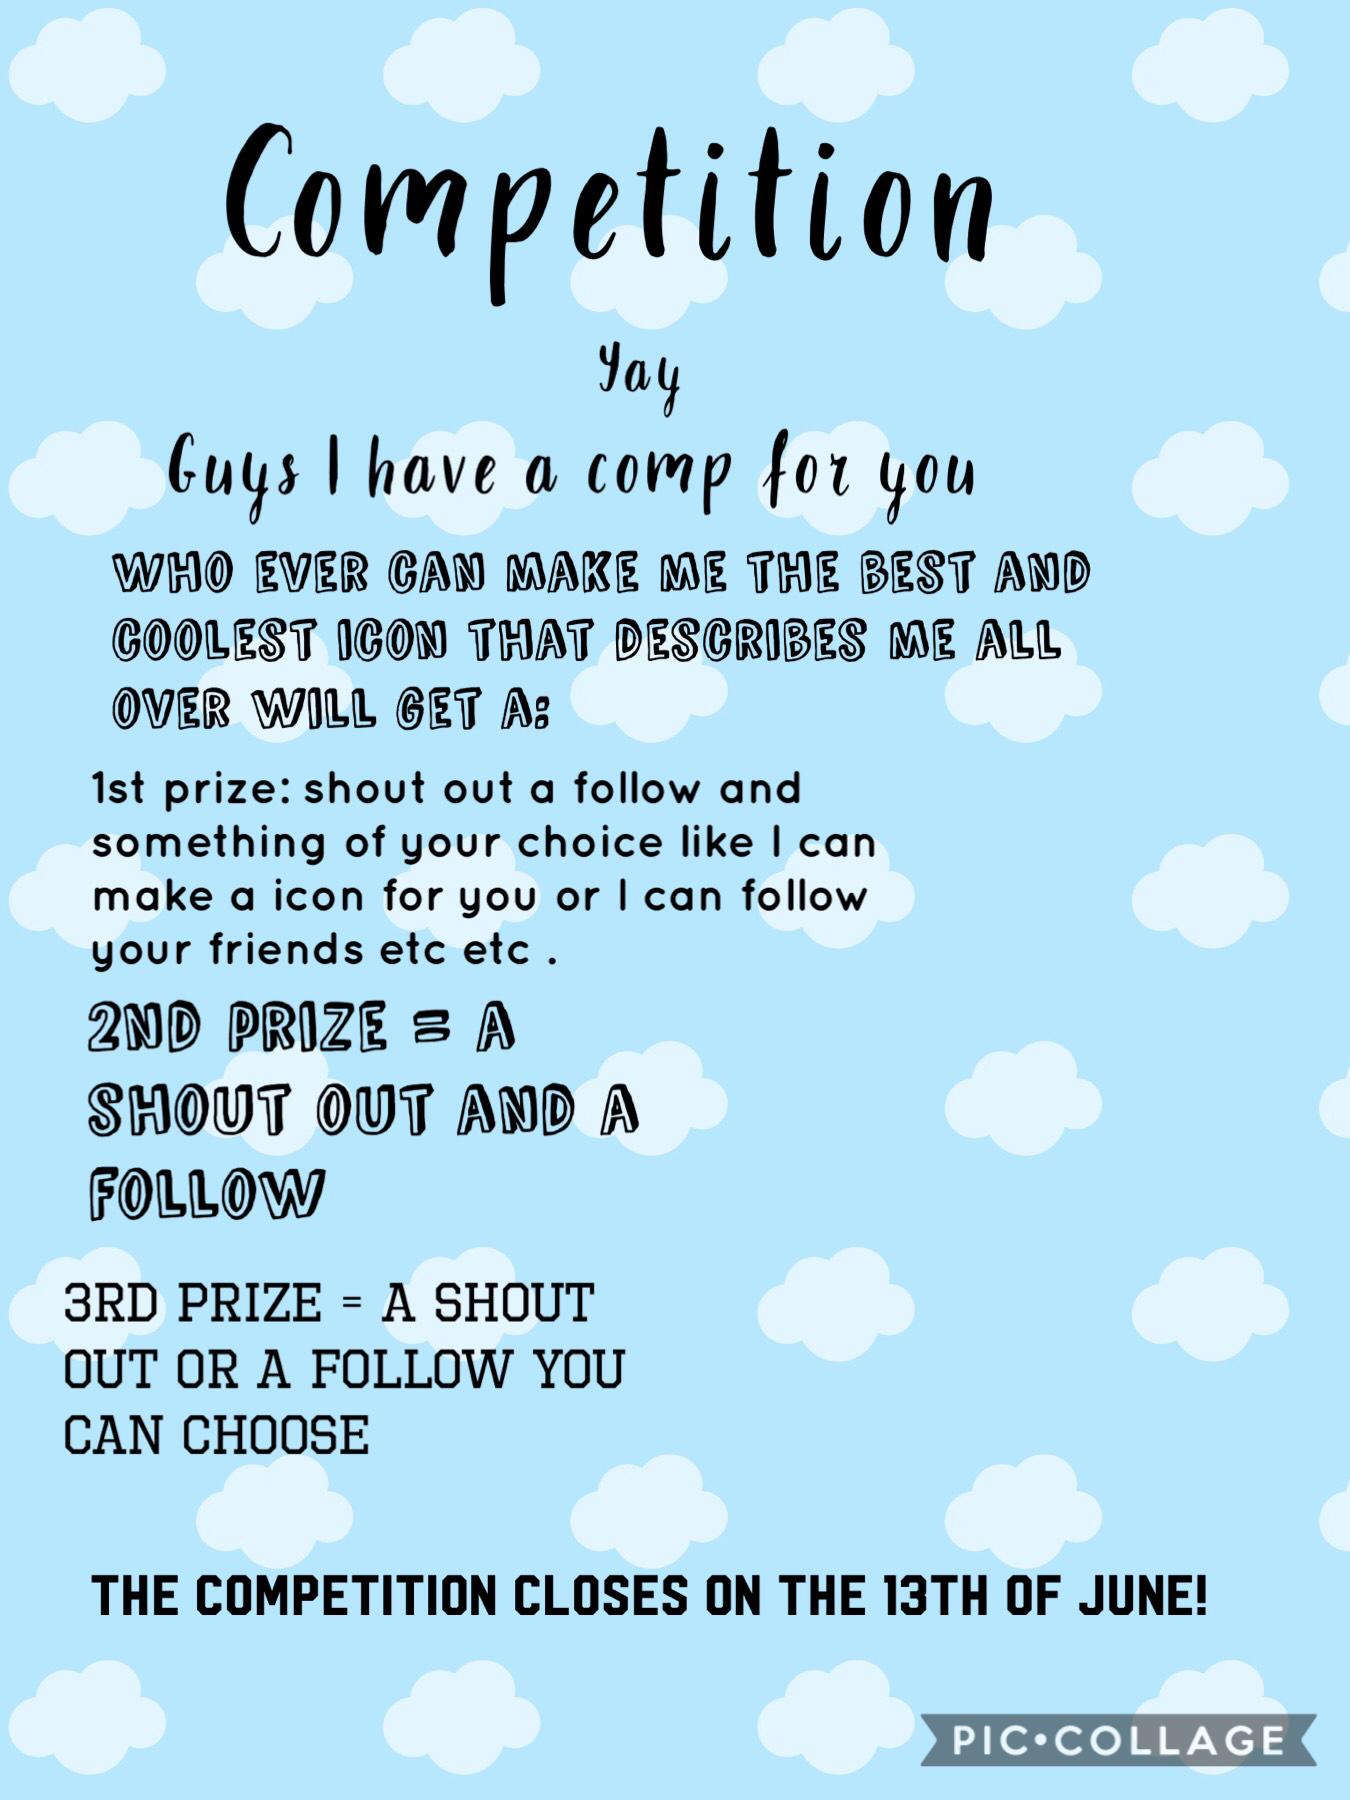 Competition alert!